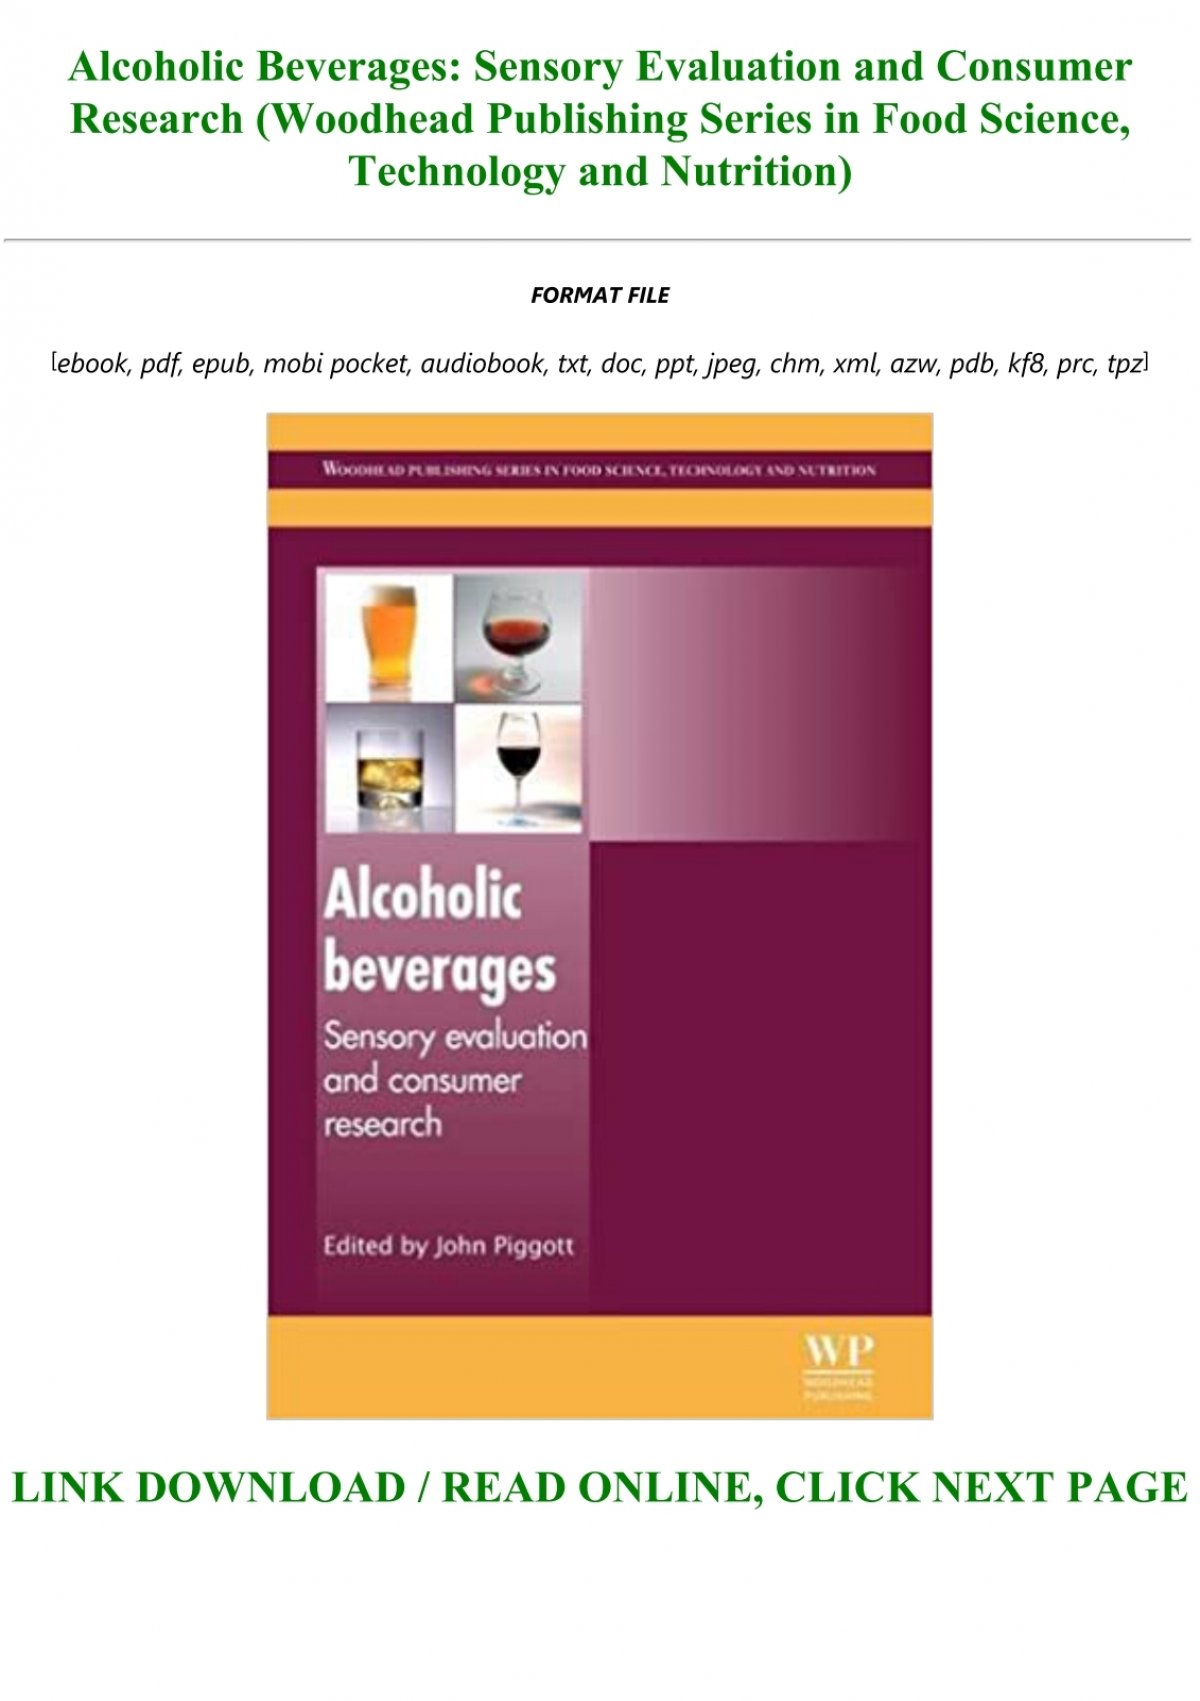 research paper about alcoholic beverages